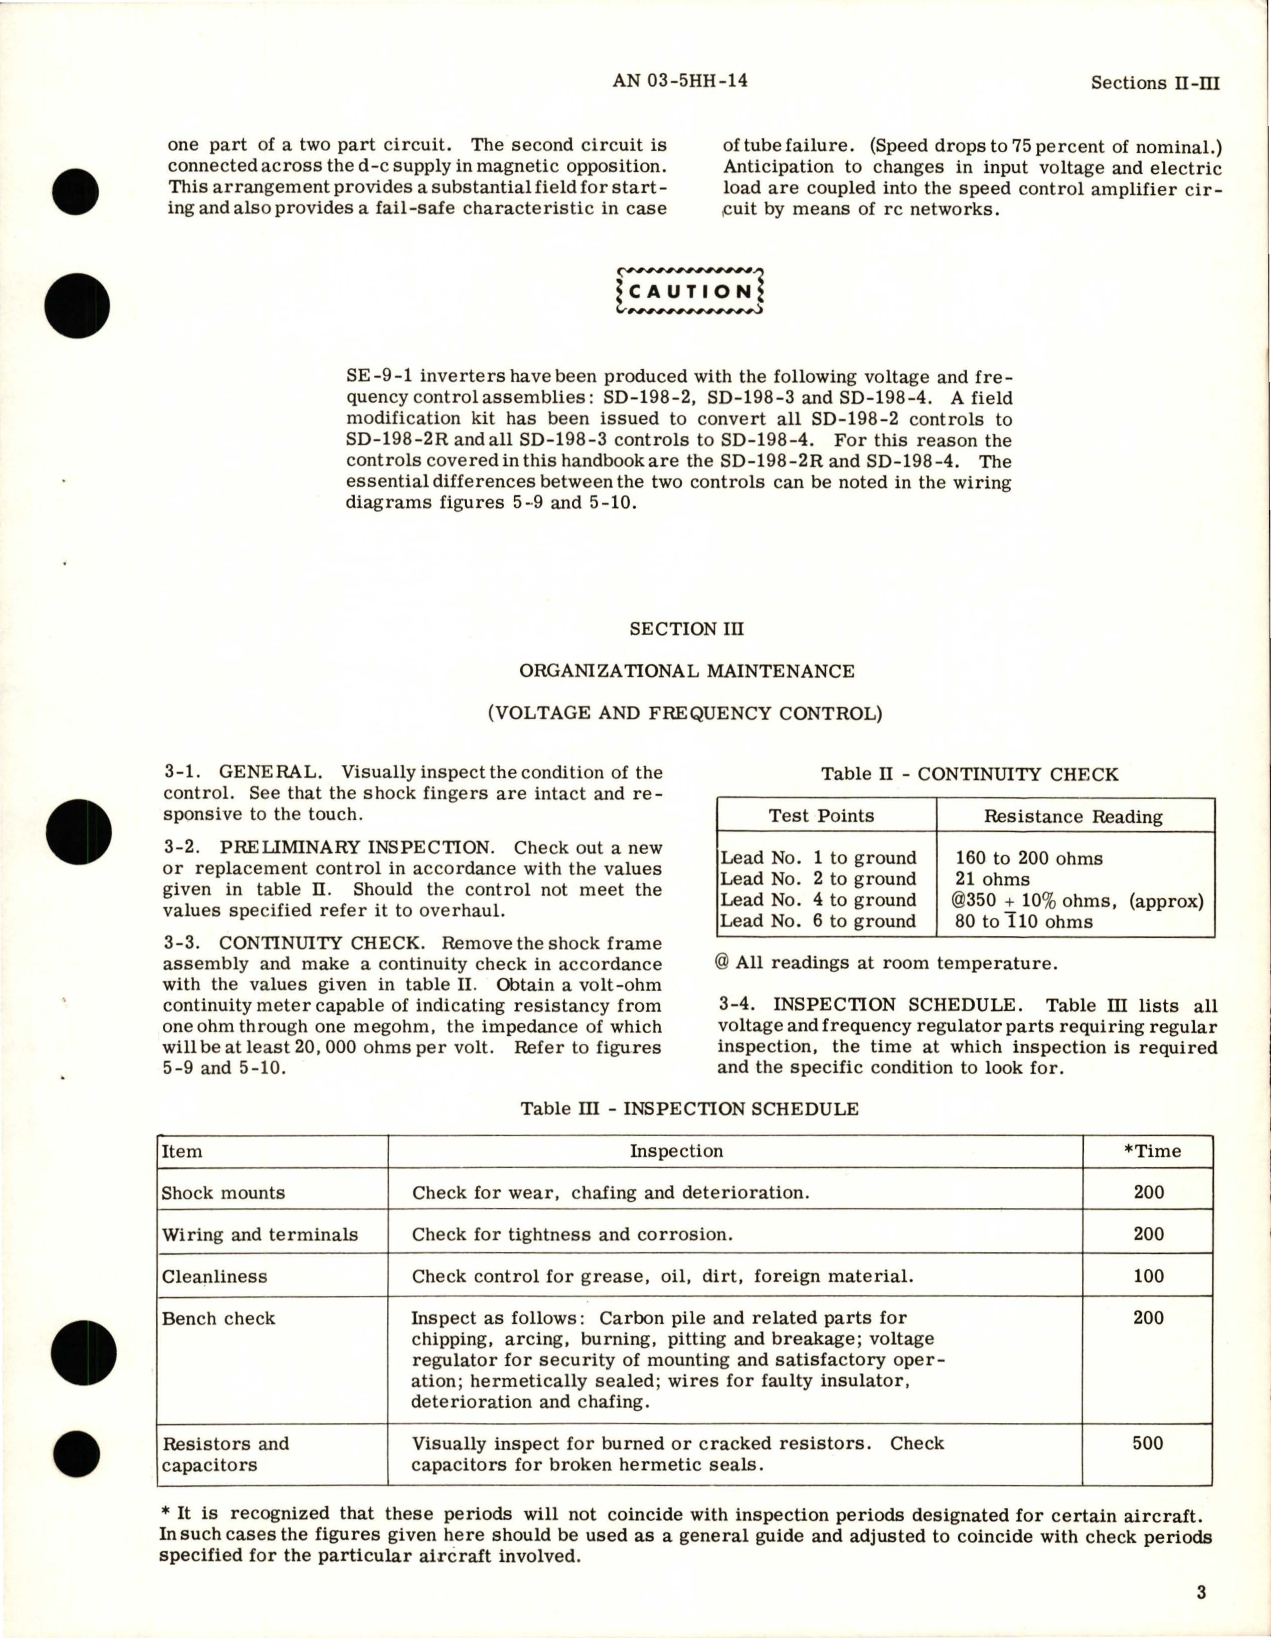 Sample page 7 from AirCorps Library document: Overhaul Instructions for Inverter - Part SE-9-1, and Motor Generator - Part SE-9-1-1A 